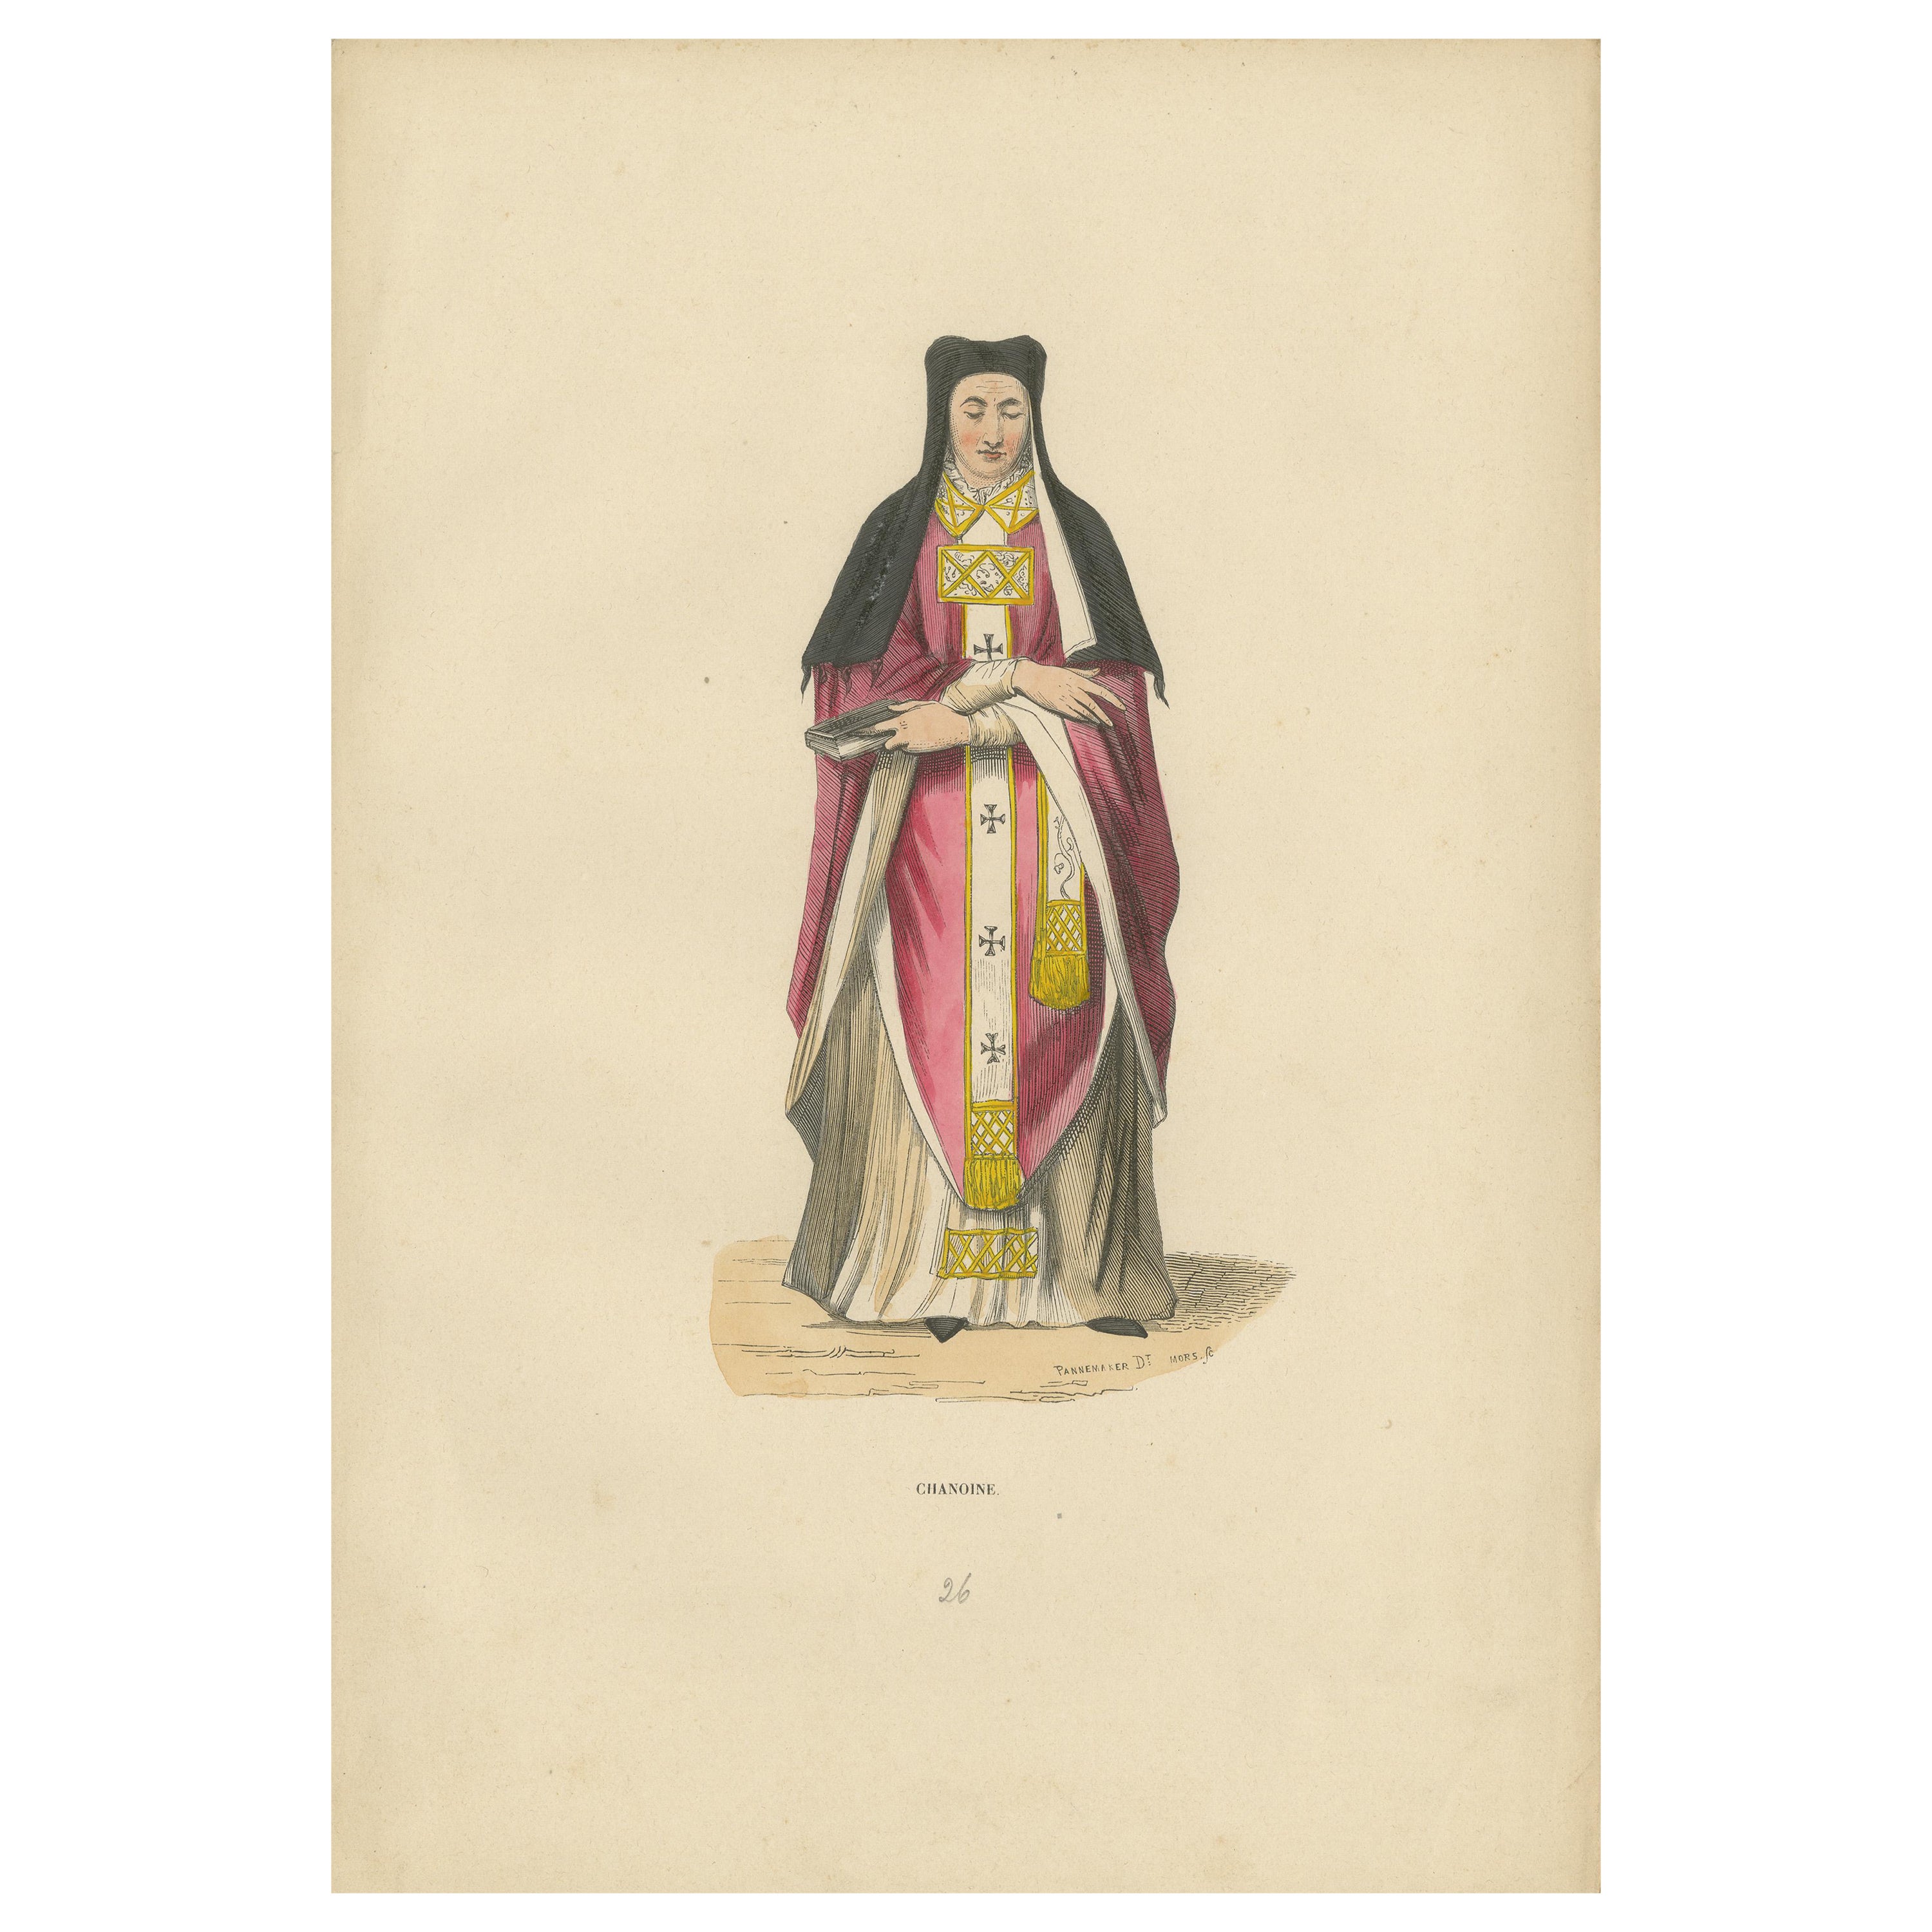 In Solemn Duty: A Canon in Contemplation, Hand-Colored Lithograph, 1847